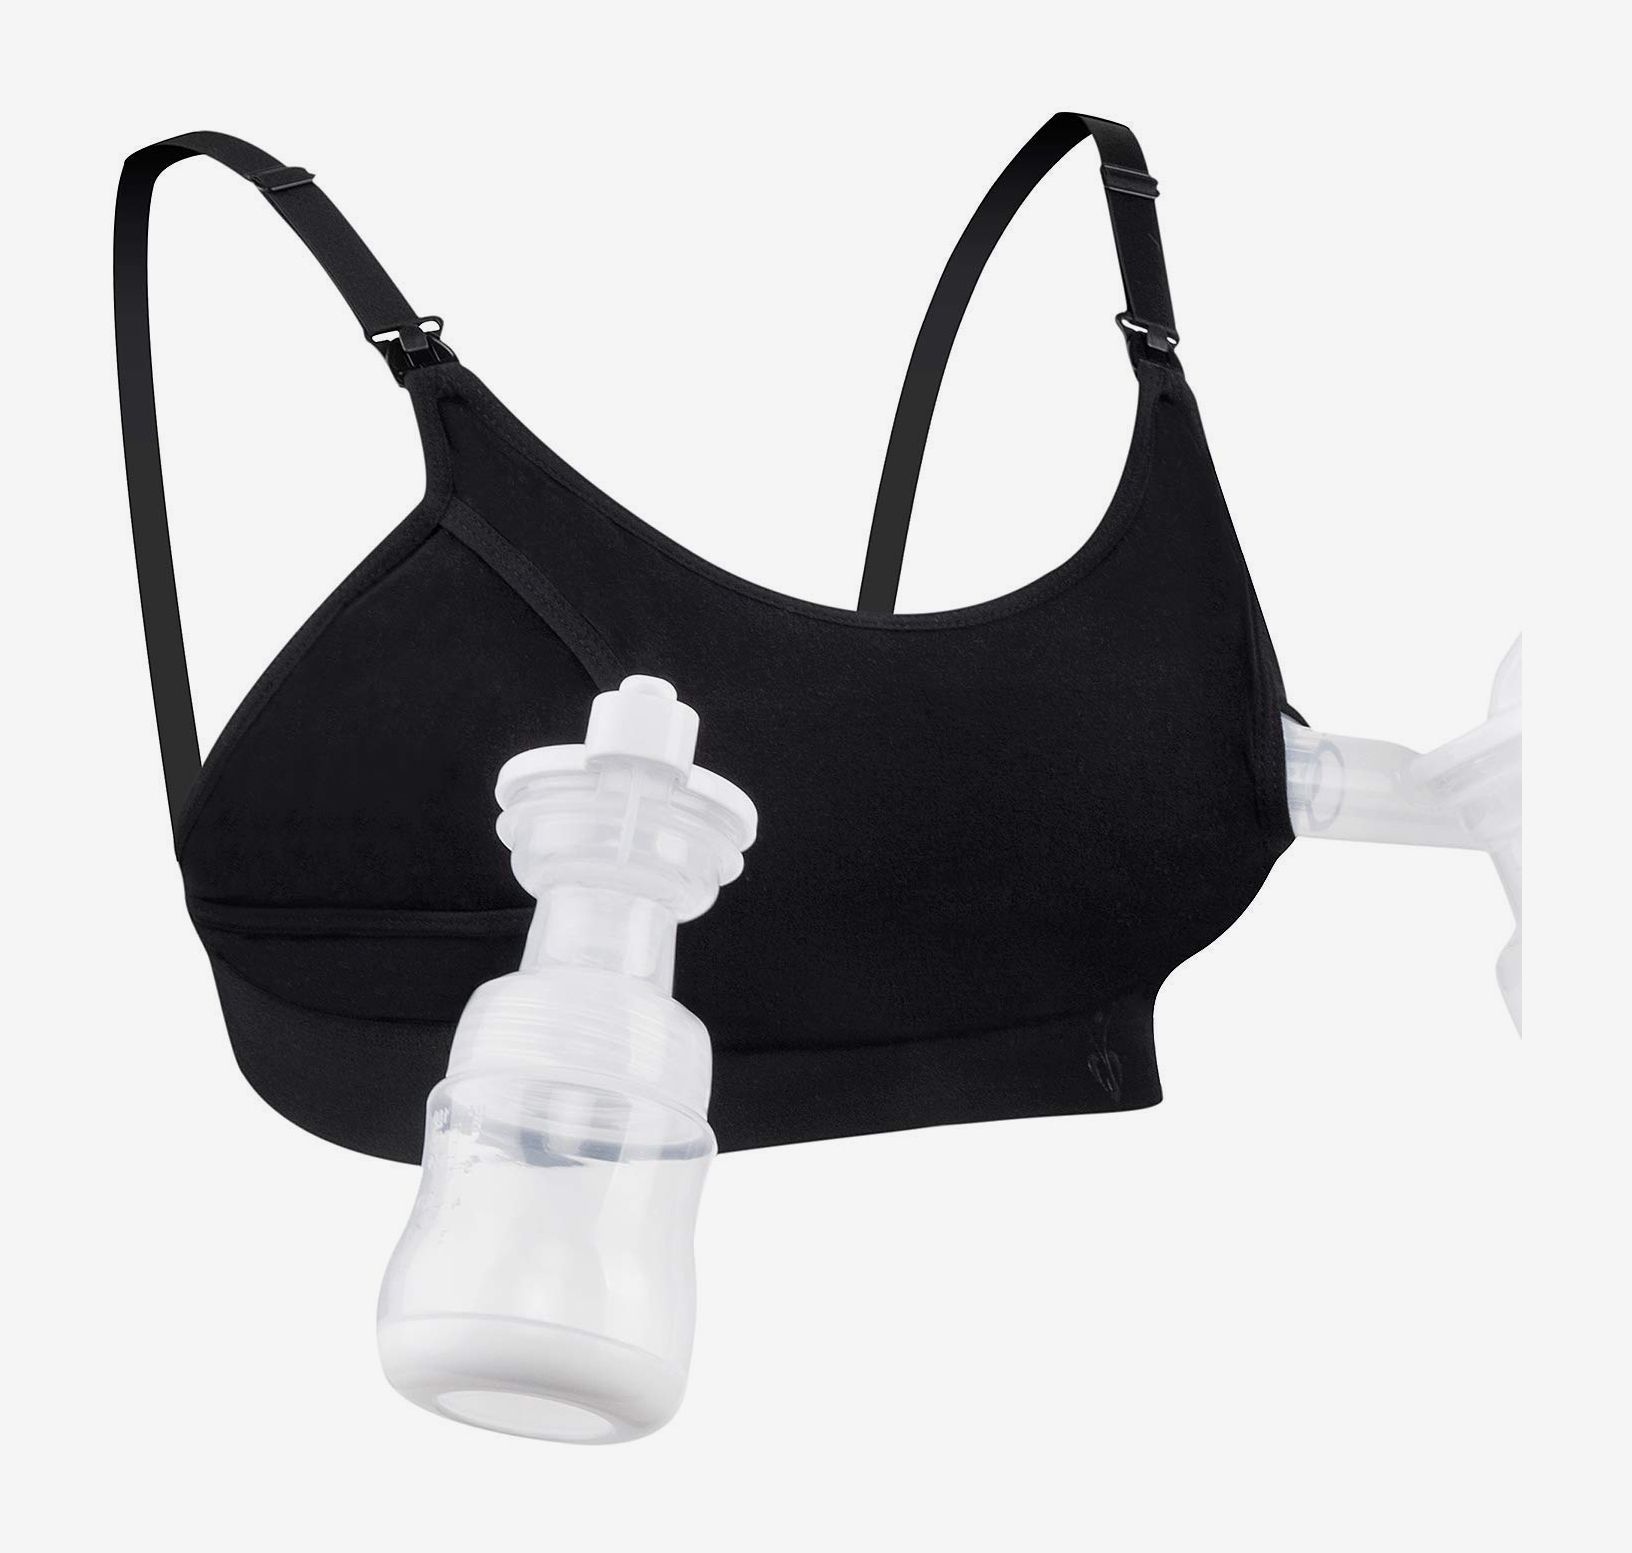 All Day Wear HATCH Premium Hands-Free Pumping & Nursing Bra Suitable for Most Breastfeeding-Pumps Free of Chemicals 